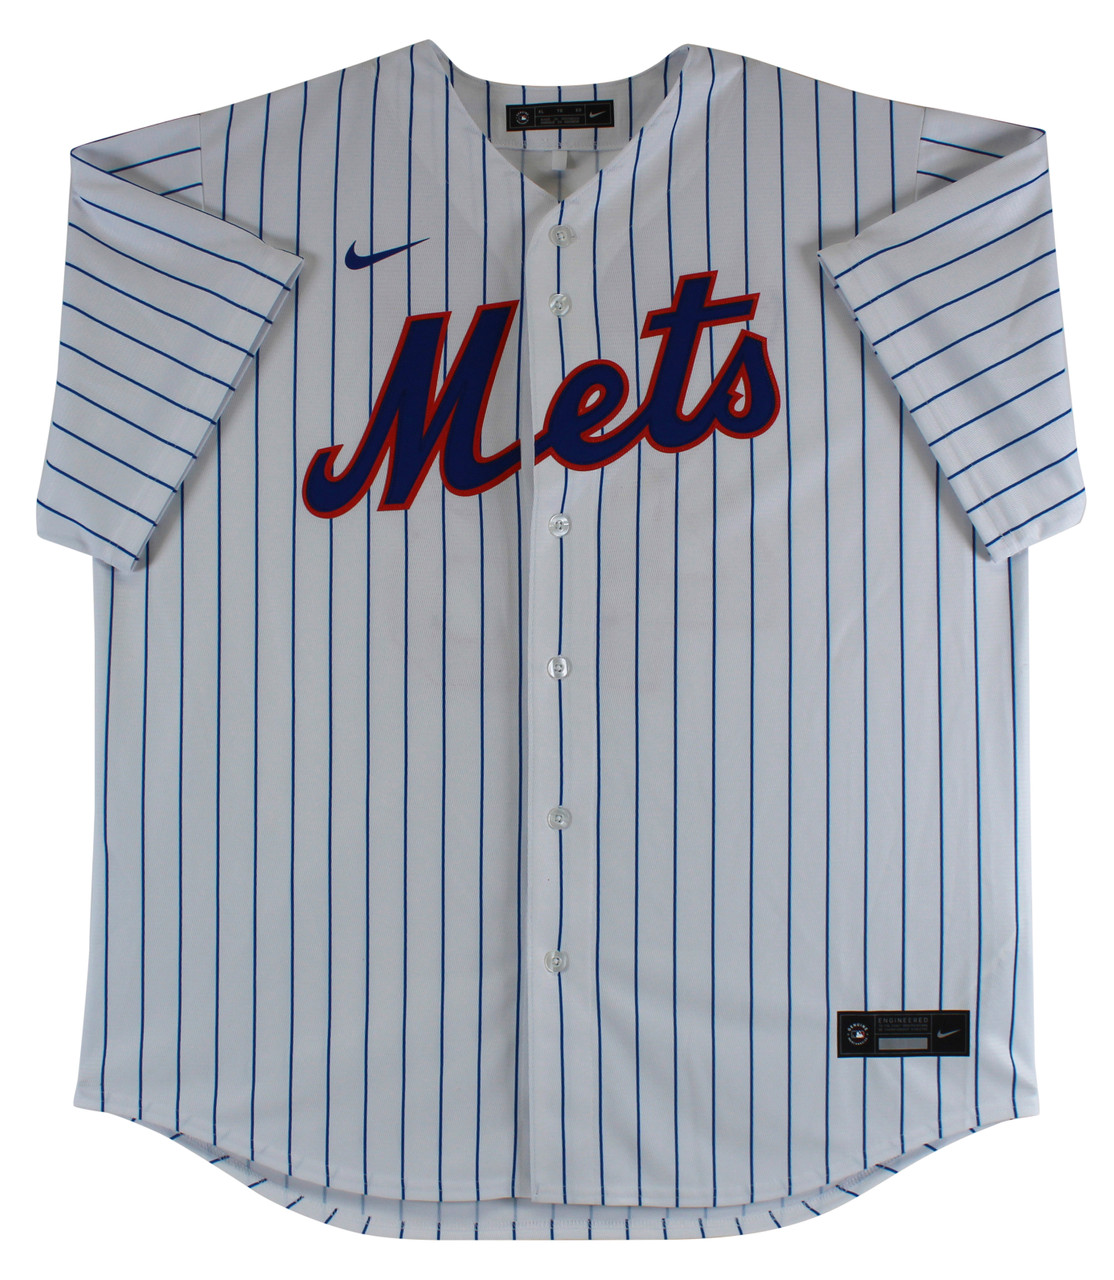 Jacob deGrom New York Mets Fanatics Authentic Autographed Nike Authentic  Jersey with 18-19 NL CY Inscription - Black